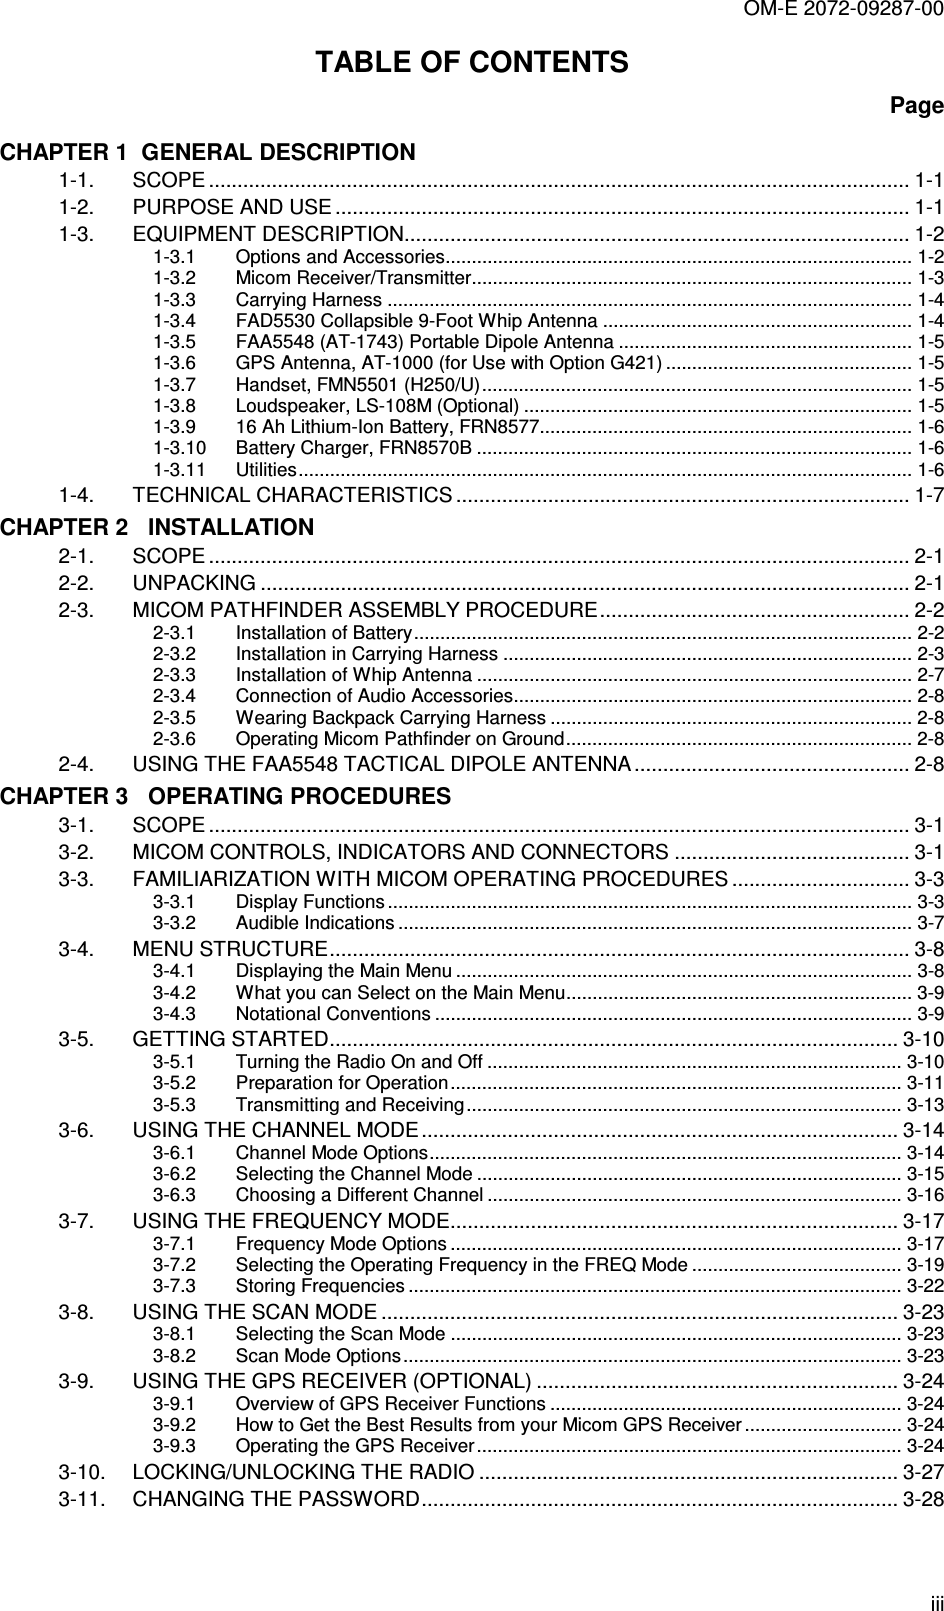 OM-E 2072-09287-00 iii TABLE OF CONTENTS Page CHAPTER 1  GENERAL DESCRIPTION 1-1. SCOPE .......................................................................................................................... 1-1 1-2. PURPOSE AND USE .................................................................................................... 1-1 1-3. EQUIPMENT DESCRIPTION........................................................................................ 1-2 1-3.1 Options and Accessories......................................................................................... 1-2 1-3.2 Micom Receiver/Transmitter.................................................................................... 1-3 1-3.3 Carrying Harness .................................................................................................... 1-4 1-3.4 FAD5530 Collapsible 9-Foot Whip Antenna ........................................................... 1-4 1-3.5 FAA5548 (AT-1743) Portable Dipole Antenna ........................................................ 1-5 1-3.6 GPS Antenna, AT-1000 (for Use with Option G421) ............................................... 1-5 1-3.7 Handset, FMN5501 (H250/U).................................................................................. 1-5 1-3.8 Loudspeaker, LS-108M (Optional) .......................................................................... 1-5 1-3.9 16 Ah Lithium-Ion Battery, FRN8577....................................................................... 1-6 1-3.10 Battery Charger, FRN8570B ................................................................................... 1-6 1-3.11 Utilities..................................................................................................................... 1-6 1-4. TECHNICAL CHARACTERISTICS ............................................................................... 1-7 CHAPTER 2   INSTALLATION 2-1. SCOPE .......................................................................................................................... 2-1 2-2. UNPACKING ................................................................................................................. 2-1 2-3. MICOM PATHFINDER ASSEMBLY PROCEDURE...................................................... 2-2 2-3.1 Installation of Battery............................................................................................... 2-2 2-3.2 Installation in Carrying Harness .............................................................................. 2-3 2-3.3 Installation of Whip Antenna ................................................................................... 2-7 2-3.4 Connection of Audio Accessories............................................................................ 2-8 2-3.5 Wearing Backpack Carrying Harness ..................................................................... 2-8 2-3.6 Operating Micom Pathfinder on Ground.................................................................. 2-8 2-4. USING THE FAA5548 TACTICAL DIPOLE ANTENNA................................................ 2-8 CHAPTER 3   OPERATING PROCEDURES 3-1. SCOPE .......................................................................................................................... 3-1 3-2. MICOM CONTROLS, INDICATORS AND CONNECTORS ......................................... 3-1 3-3. FAMILIARIZATION WITH MICOM OPERATING PROCEDURES ............................... 3-3 3-3.1 Display Functions .................................................................................................... 3-3 3-3.2 Audible Indications .................................................................................................. 3-7 3-4. MENU STRUCTURE..................................................................................................... 3-8 3-4.1 Displaying the Main Menu ....................................................................................... 3-8 3-4.2 What you can Select on the Main Menu.................................................................. 3-9 3-4.3 Notational Conventions ........................................................................................... 3-9 3-5. GETTING STARTED................................................................................................... 3-10 3-5.1 Turning the Radio On and Off ............................................................................... 3-10 3-5.2 Preparation for Operation ...................................................................................... 3-11 3-5.3 Transmitting and Receiving................................................................................... 3-13 3-6. USING THE CHANNEL MODE ................................................................................... 3-14 3-6.1 Channel Mode Options.......................................................................................... 3-14 3-6.2 Selecting the Channel Mode ................................................................................. 3-15 3-6.3 Choosing a Different Channel ............................................................................... 3-16 3-7. USING THE FREQUENCY MODE.............................................................................. 3-17 3-7.1 Frequency Mode Options ...................................................................................... 3-17 3-7.2 Selecting the Operating Frequency in the FREQ Mode ........................................ 3-19 3-7.3 Storing Frequencies .............................................................................................. 3-22 3-8. USING THE SCAN MODE .......................................................................................... 3-23 3-8.1 Selecting the Scan Mode ...................................................................................... 3-23 3-8.2 Scan Mode Options............................................................................................... 3-23 3-9. USING THE GPS RECEIVER (OPTIONAL) ............................................................... 3-24 3-9.1 Overview of GPS Receiver Functions ................................................................... 3-24 3-9.2 How to Get the Best Results from your Micom GPS Receiver .............................. 3-24 3-9.3 Operating the GPS Receiver ................................................................................. 3-24 3-10. LOCKING/UNLOCKING THE RADIO ......................................................................... 3-27 3-11. CHANGING THE PASSWORD................................................................................... 3-28 